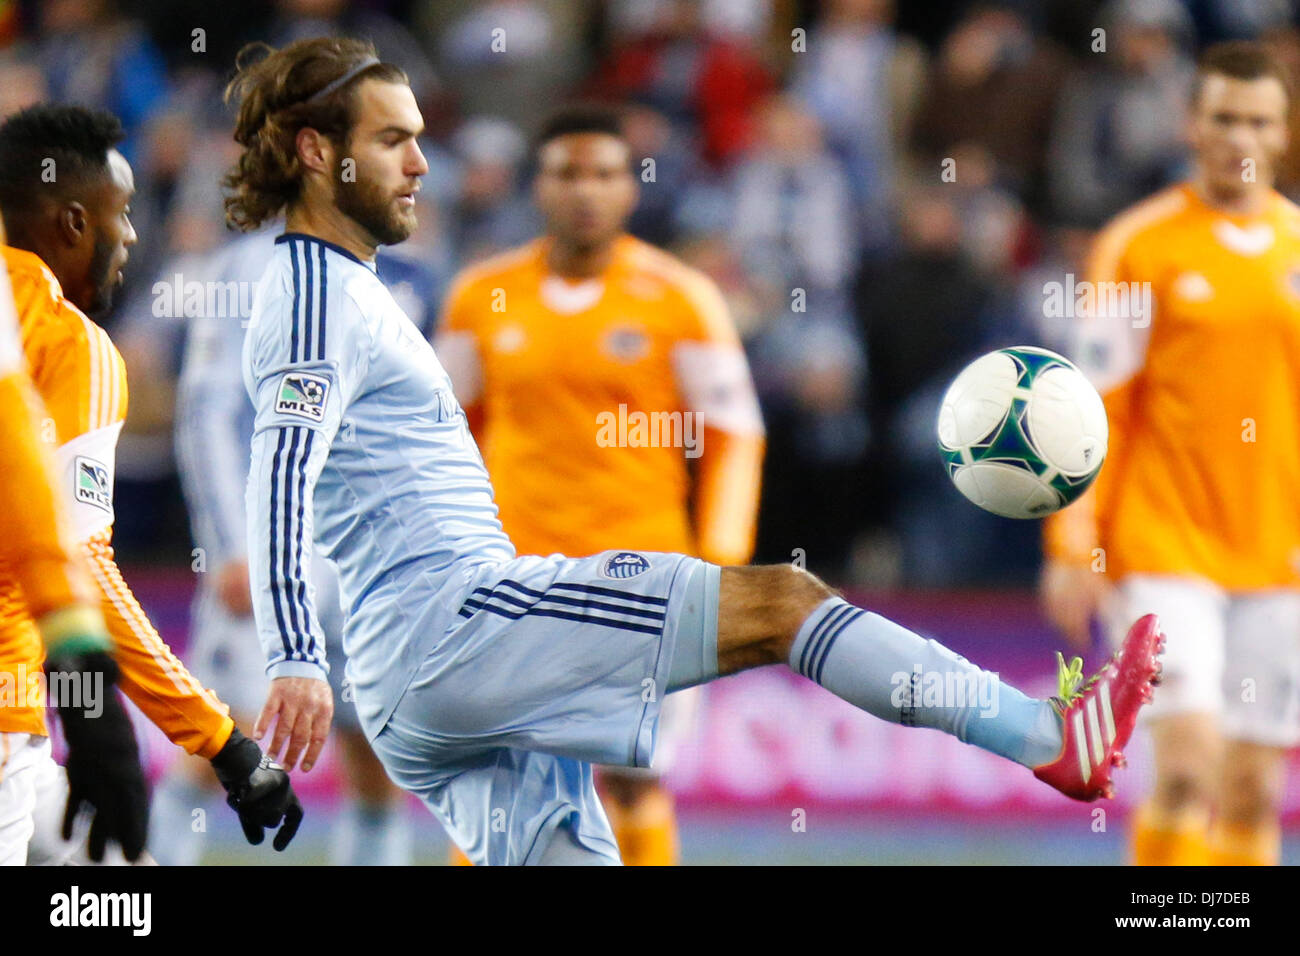 Nov. 23, 2013 - November 23, 2013: Graham Zusi #8 of the Sporting KC attempts to gain control of a pass against the Houston Dynamo in the second half during the MLS semi-final on November 23, 2013 at Sporting Park in Kansas City, Kansas. Stock Photo